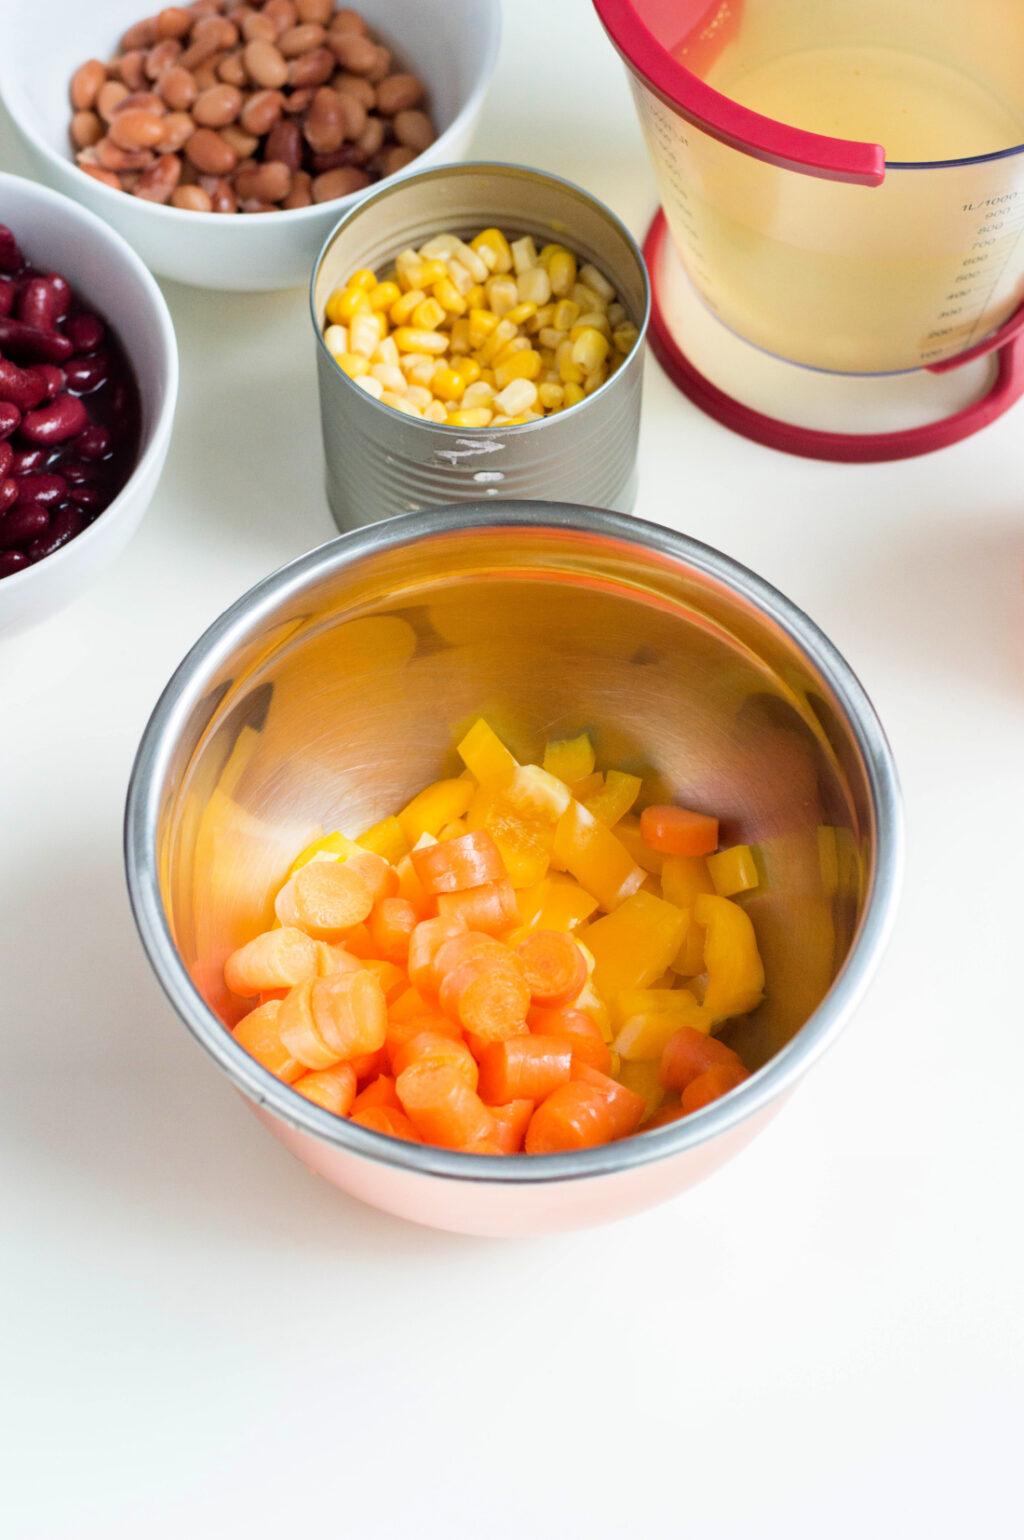 A metal bowl containing diced carrots and yellow bell peppers, with surrounding ingredients like corn, beans, and a measuring cup of liquid for a vegetarian instant pot chili.